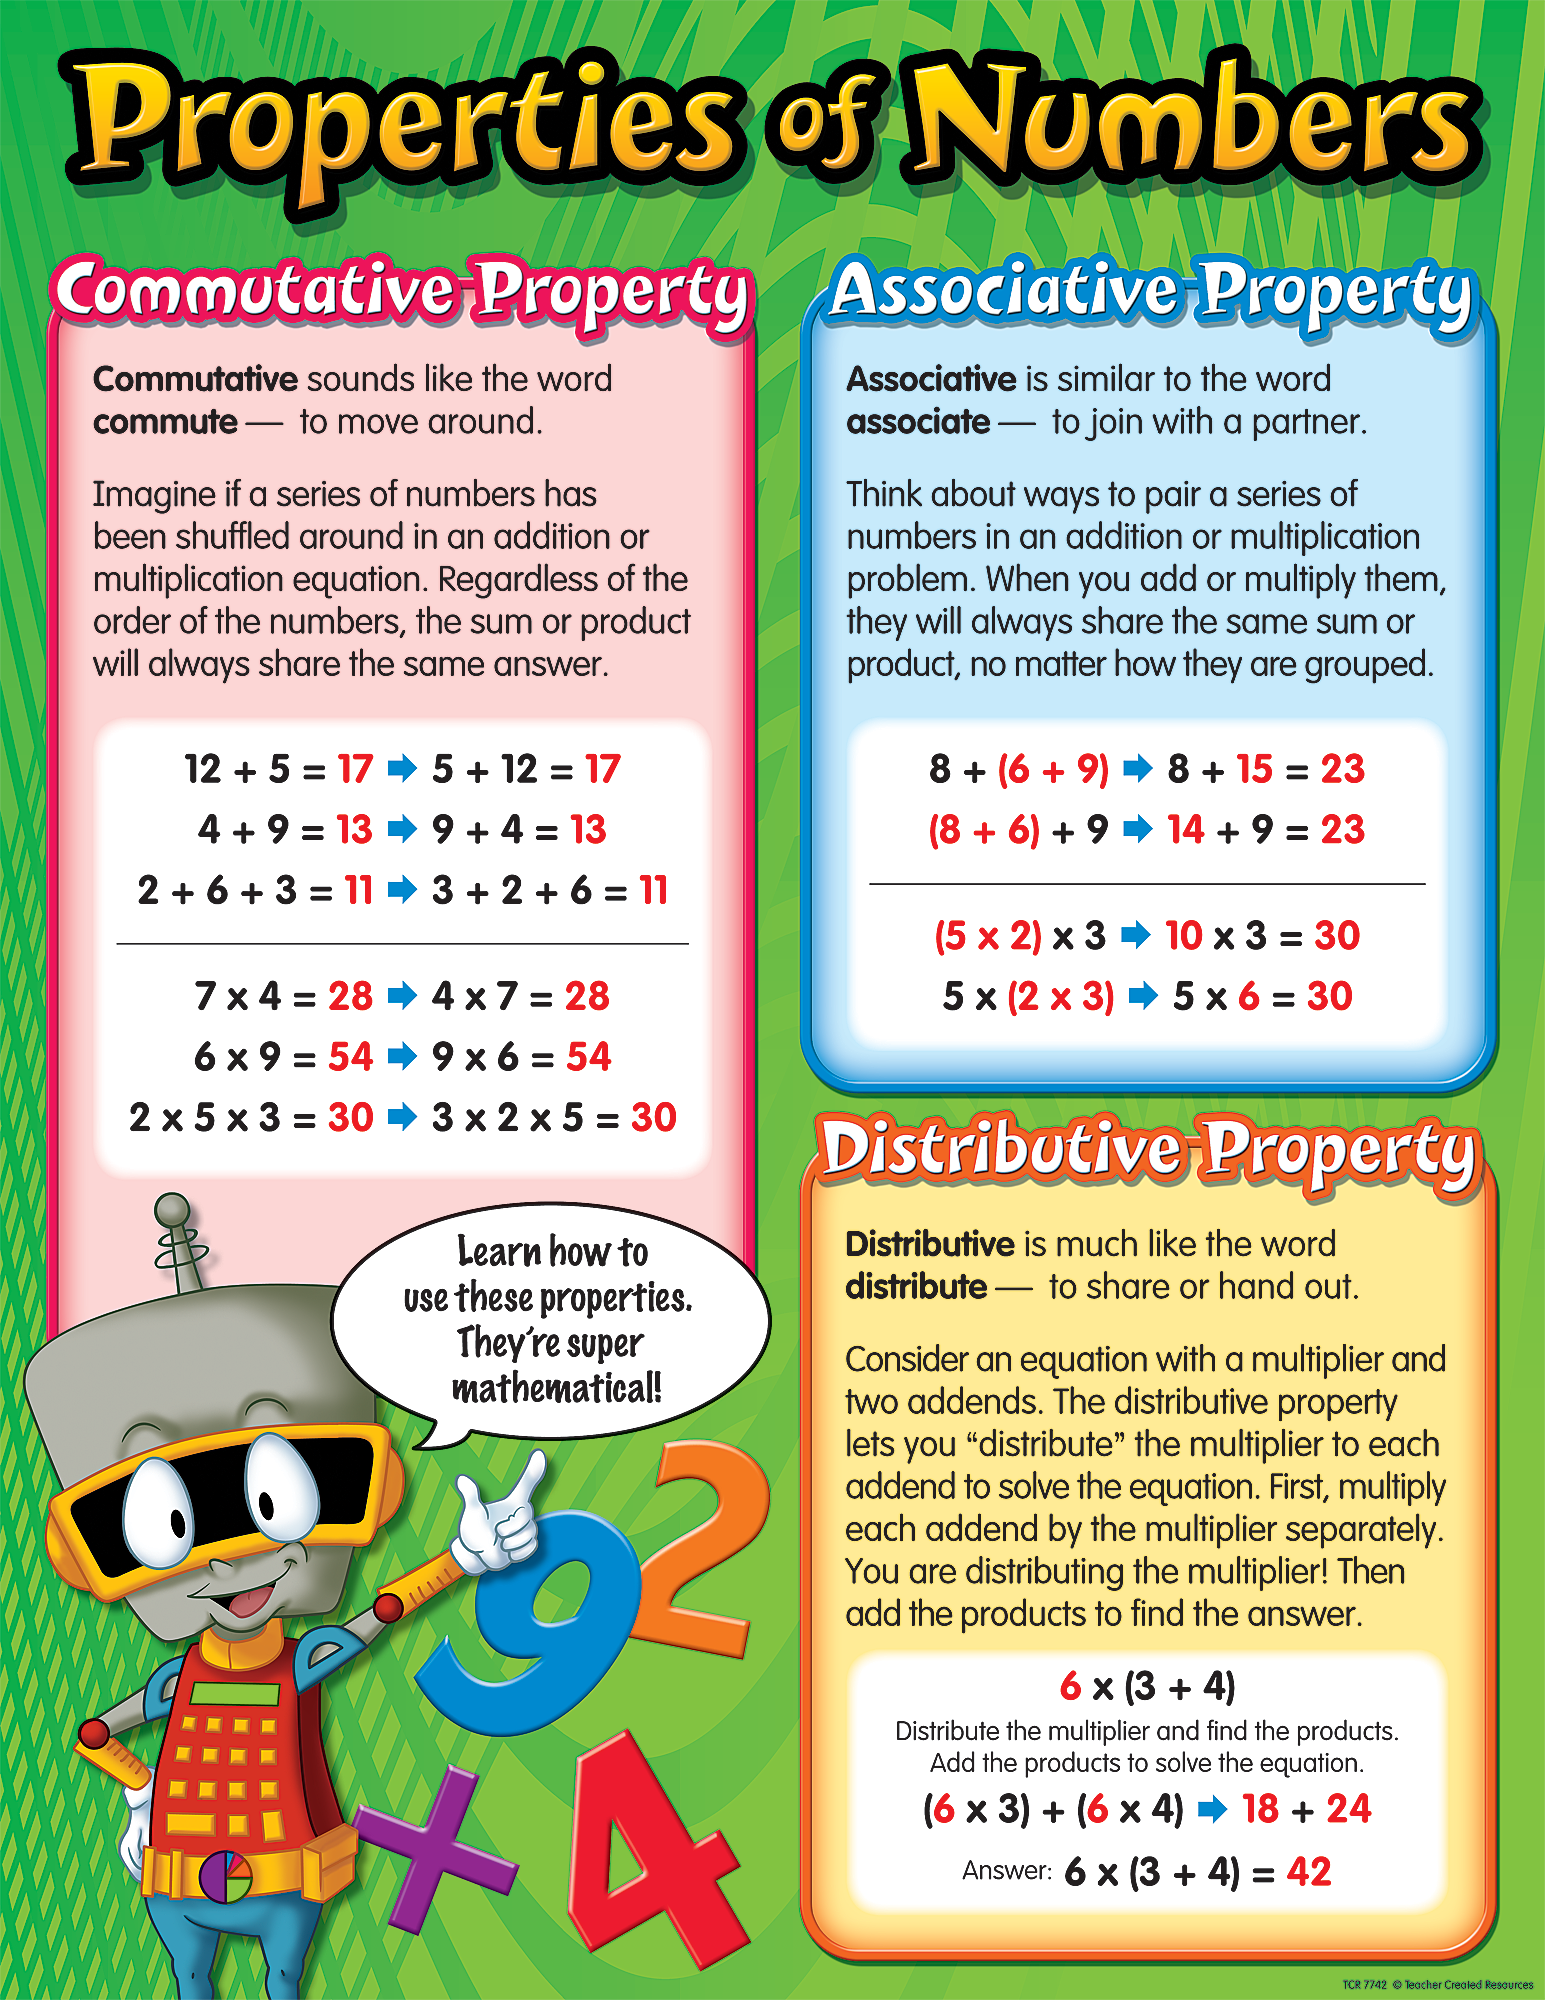 properties-of-real-numbers-teach-math-interactive